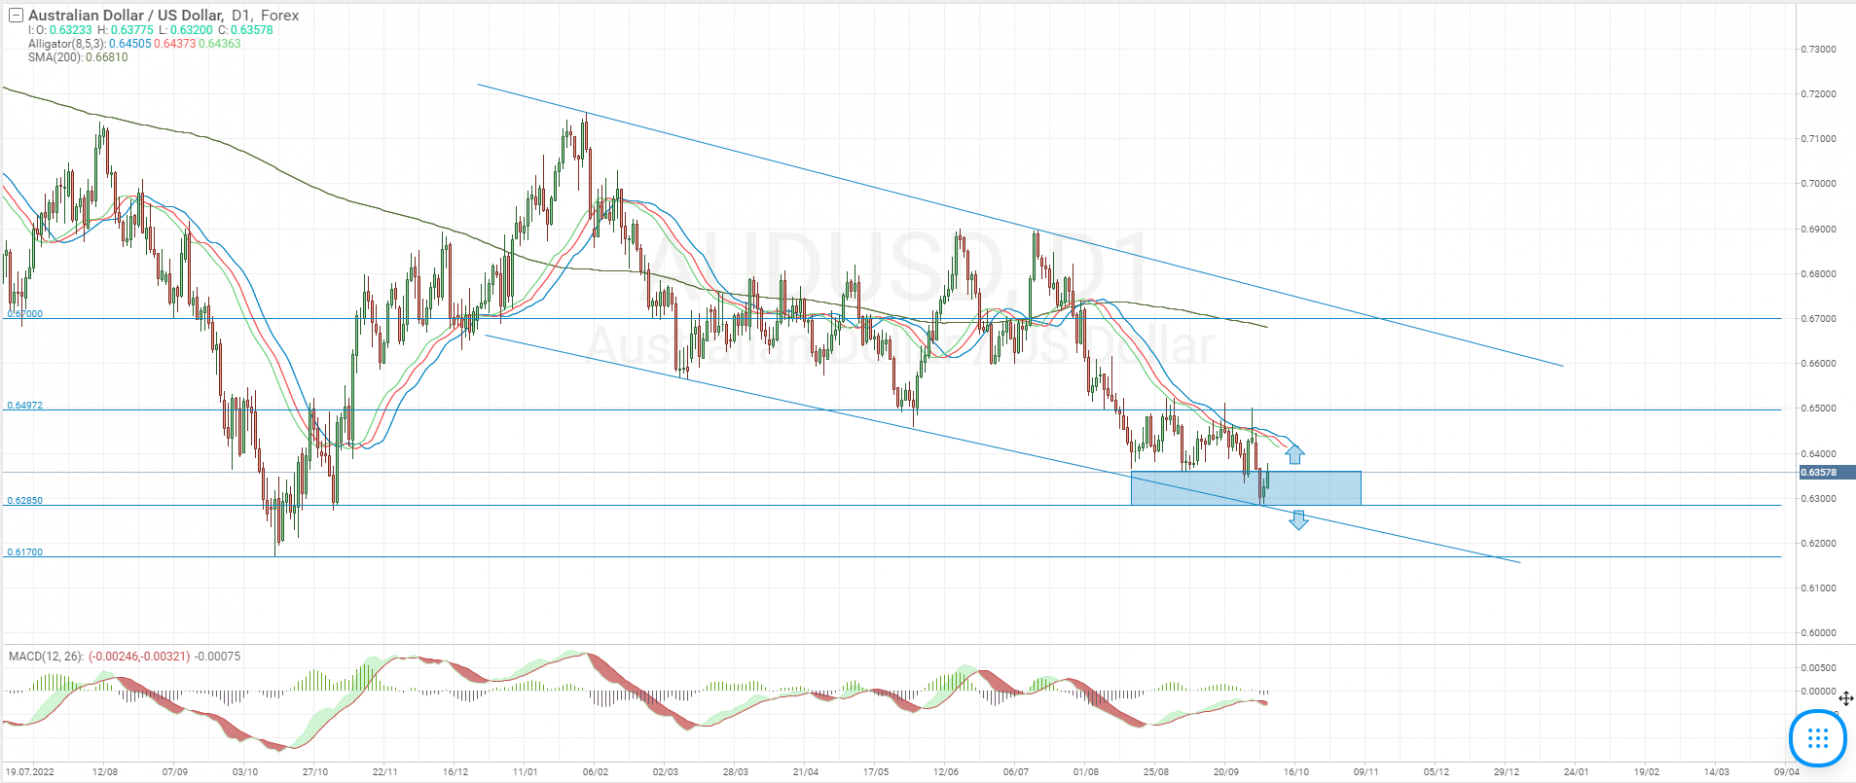 Technical analysis of the AUD/USD currency pair